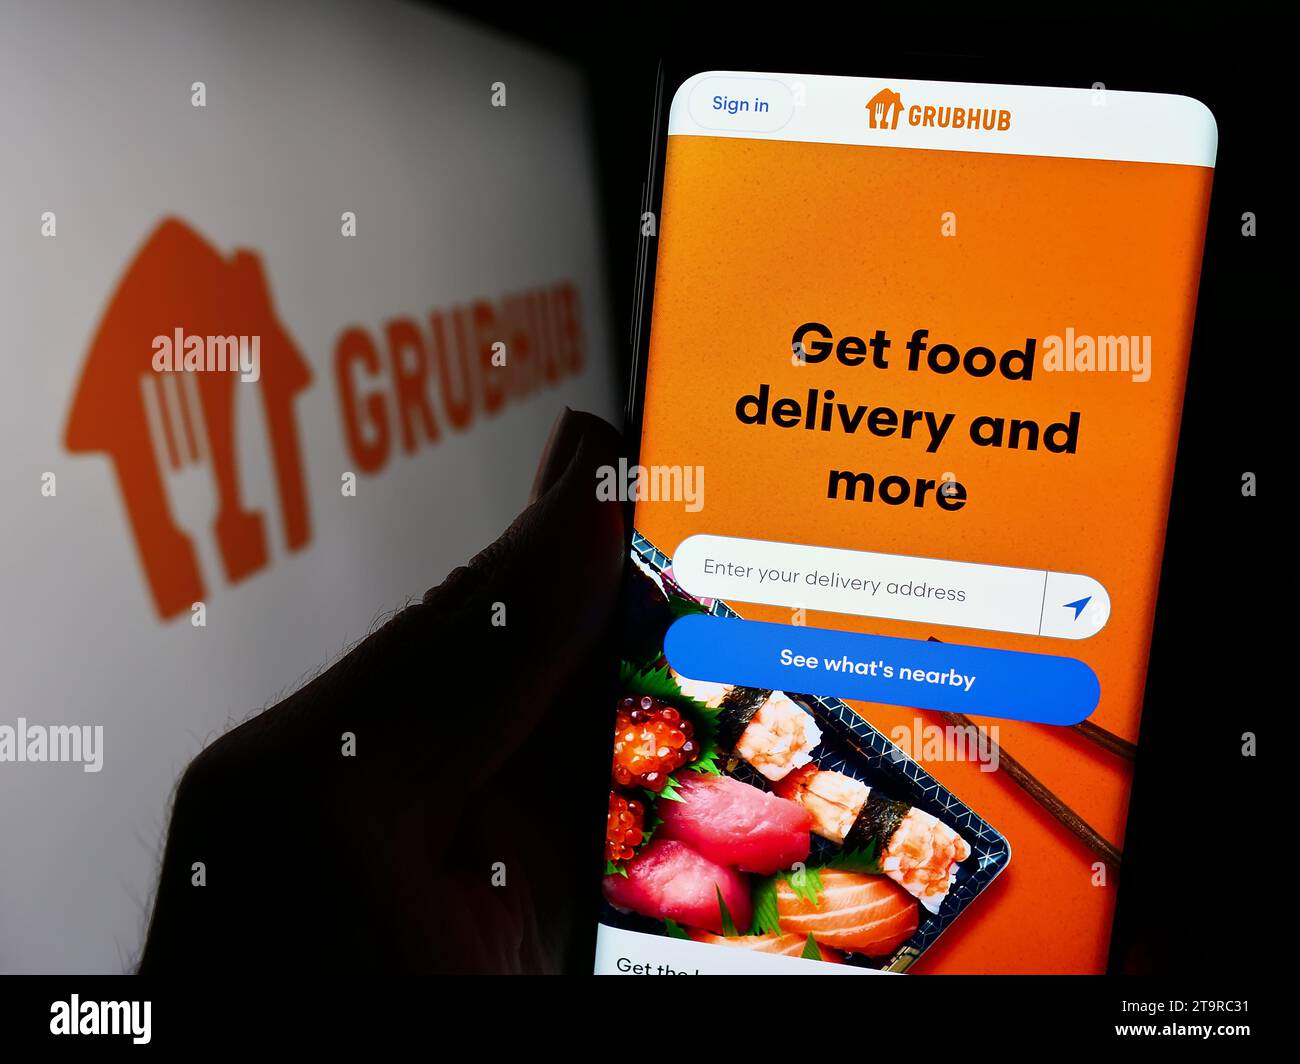 Person holding cellphone with webpage of US food ordering and delivery company Grubhub Inc. in front of logo. Focus on center of phone display. Stock Photo